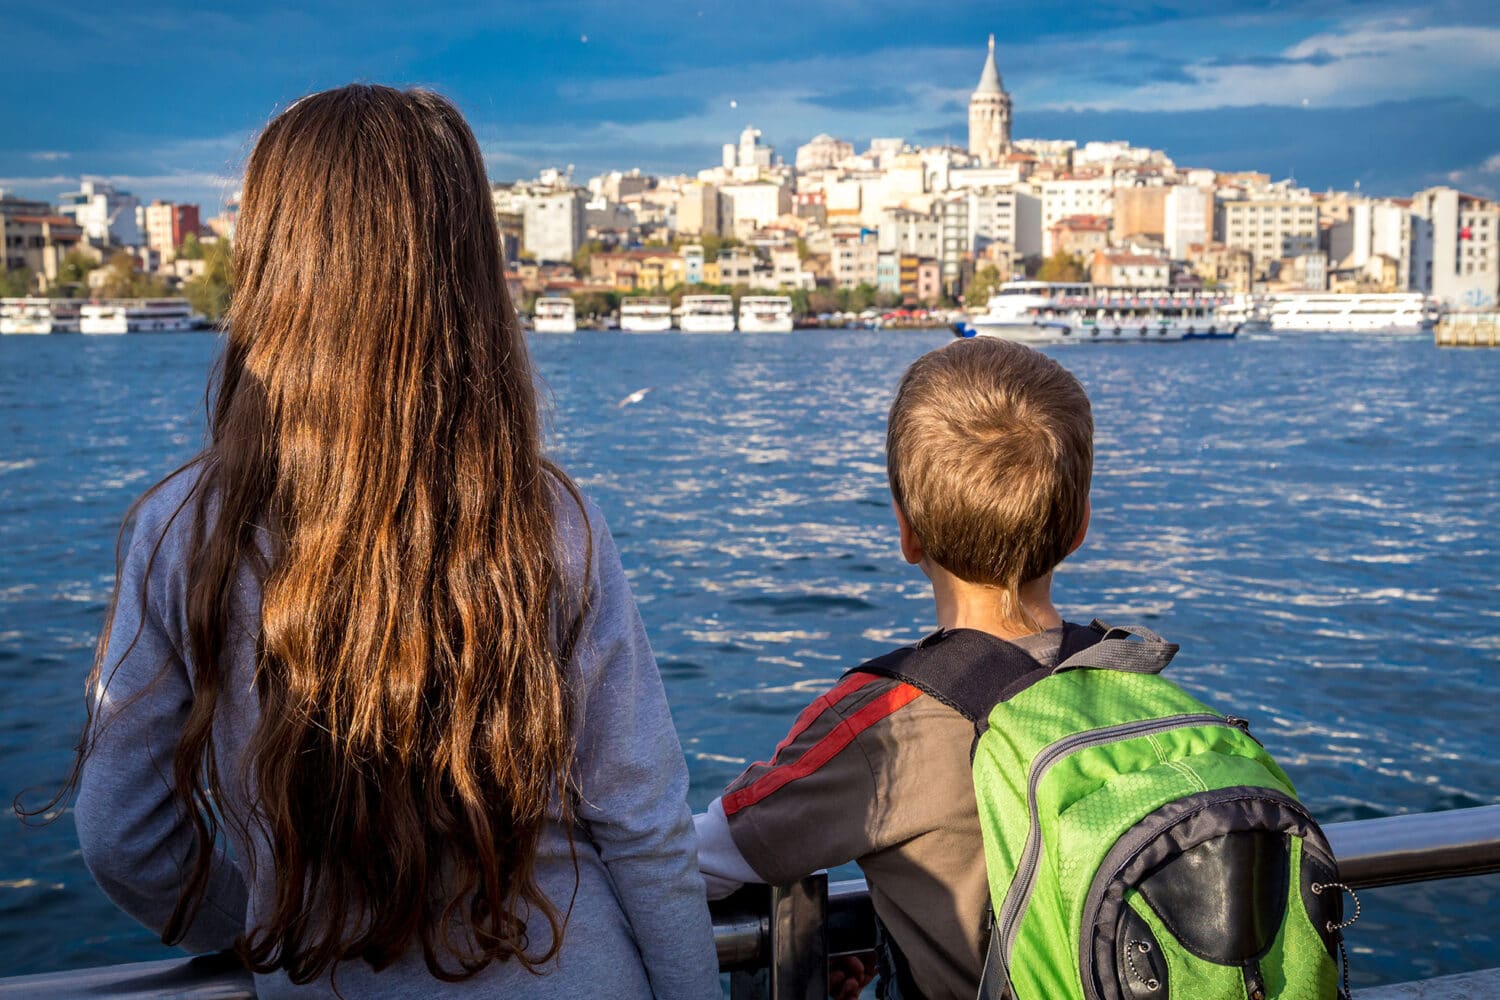 Tour Photos Kids Looking at Galata Tower from Bosphorus